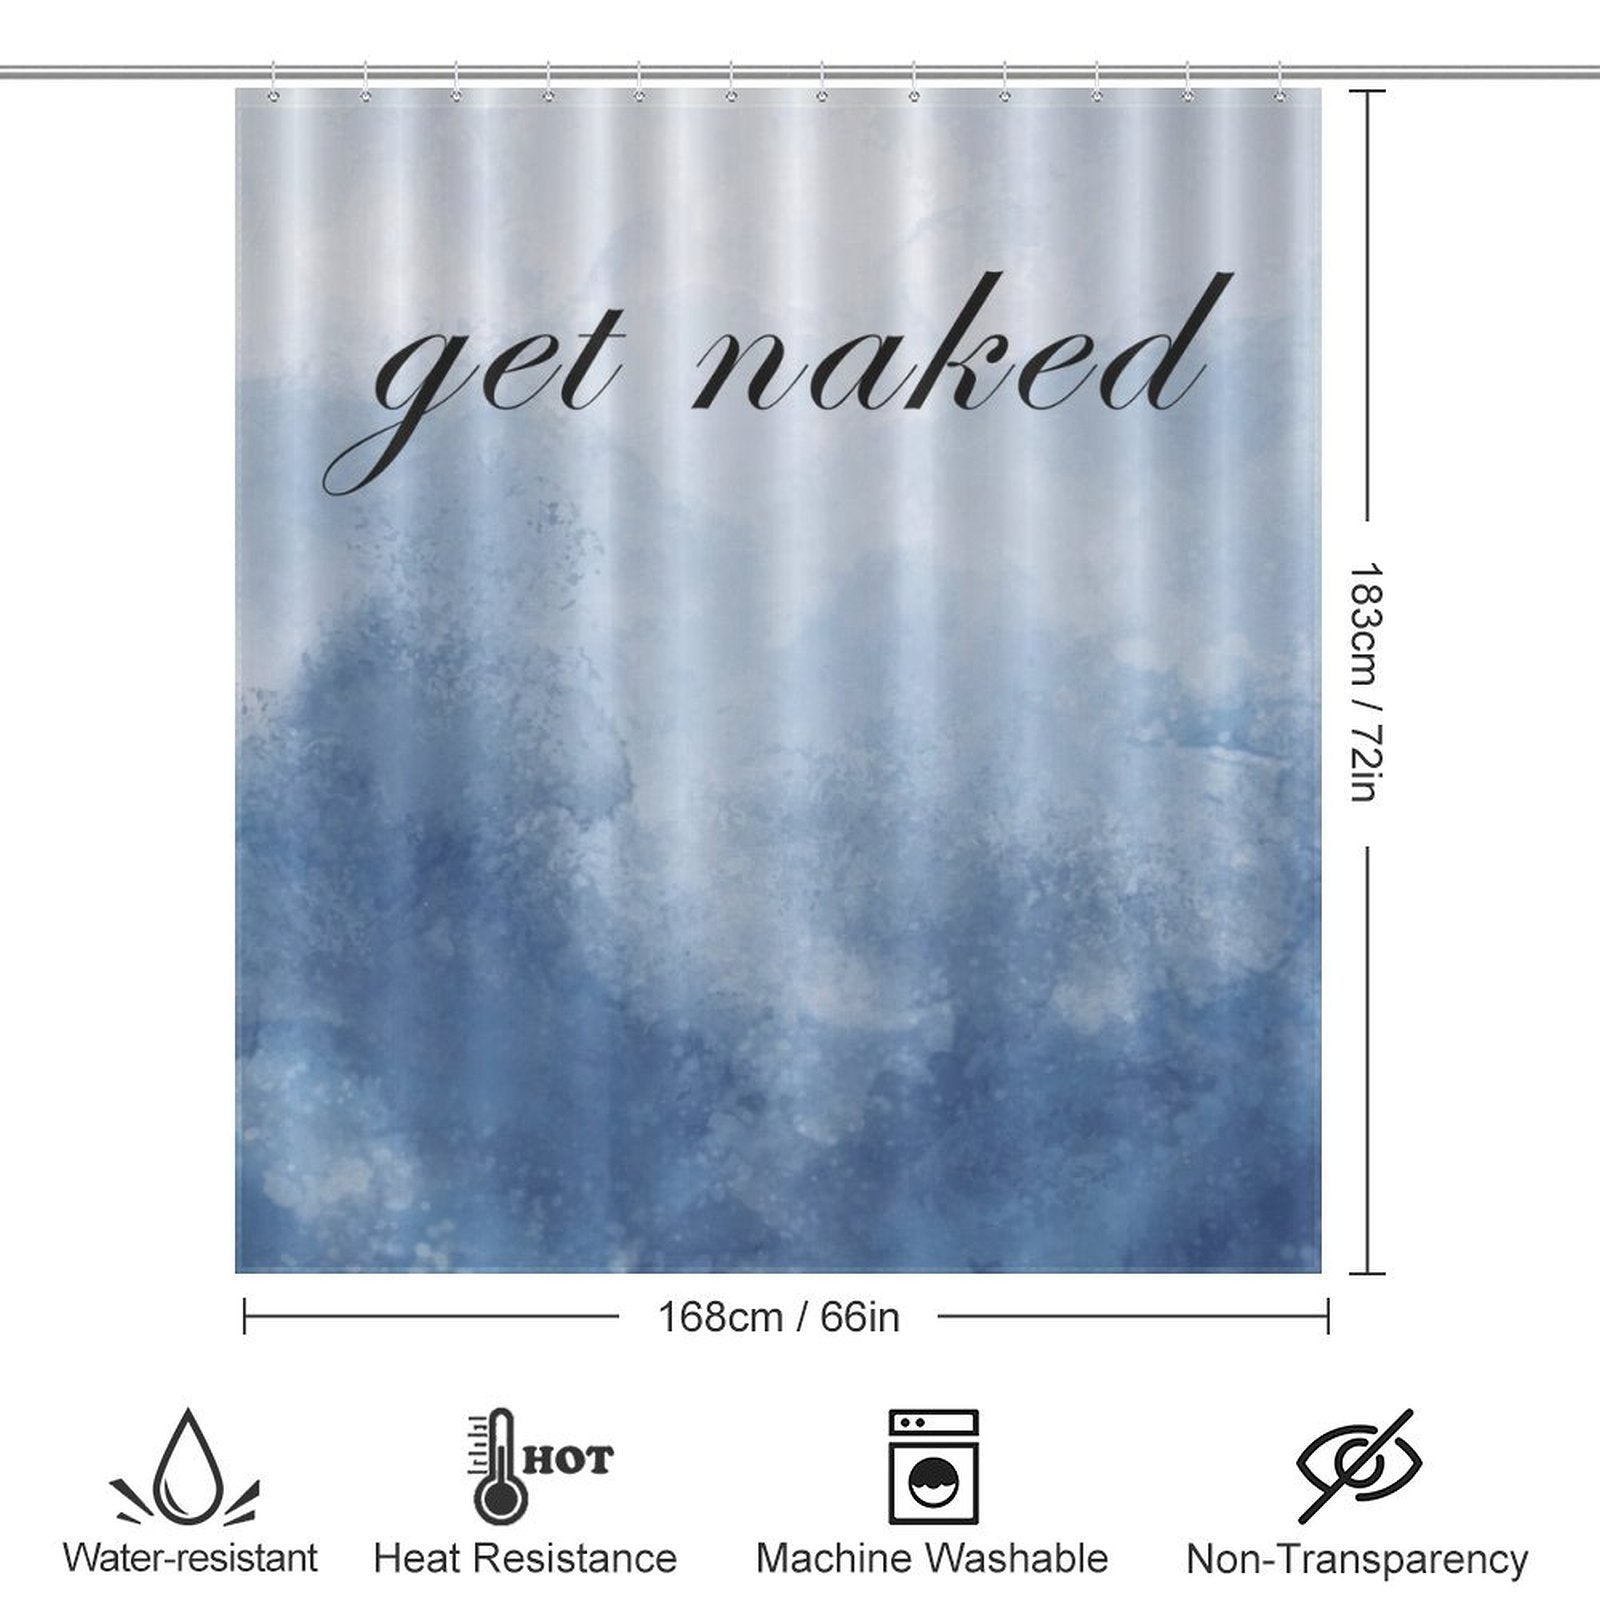 The "Funny Letters Abstract Blue Get Naked Shower Curtain-Cottoncat" with its abstract blue gradient design and funny letters is water-resistant, heat-resistant, machine washable, and non-transparent. Dimensions are 168cm x 183cm.